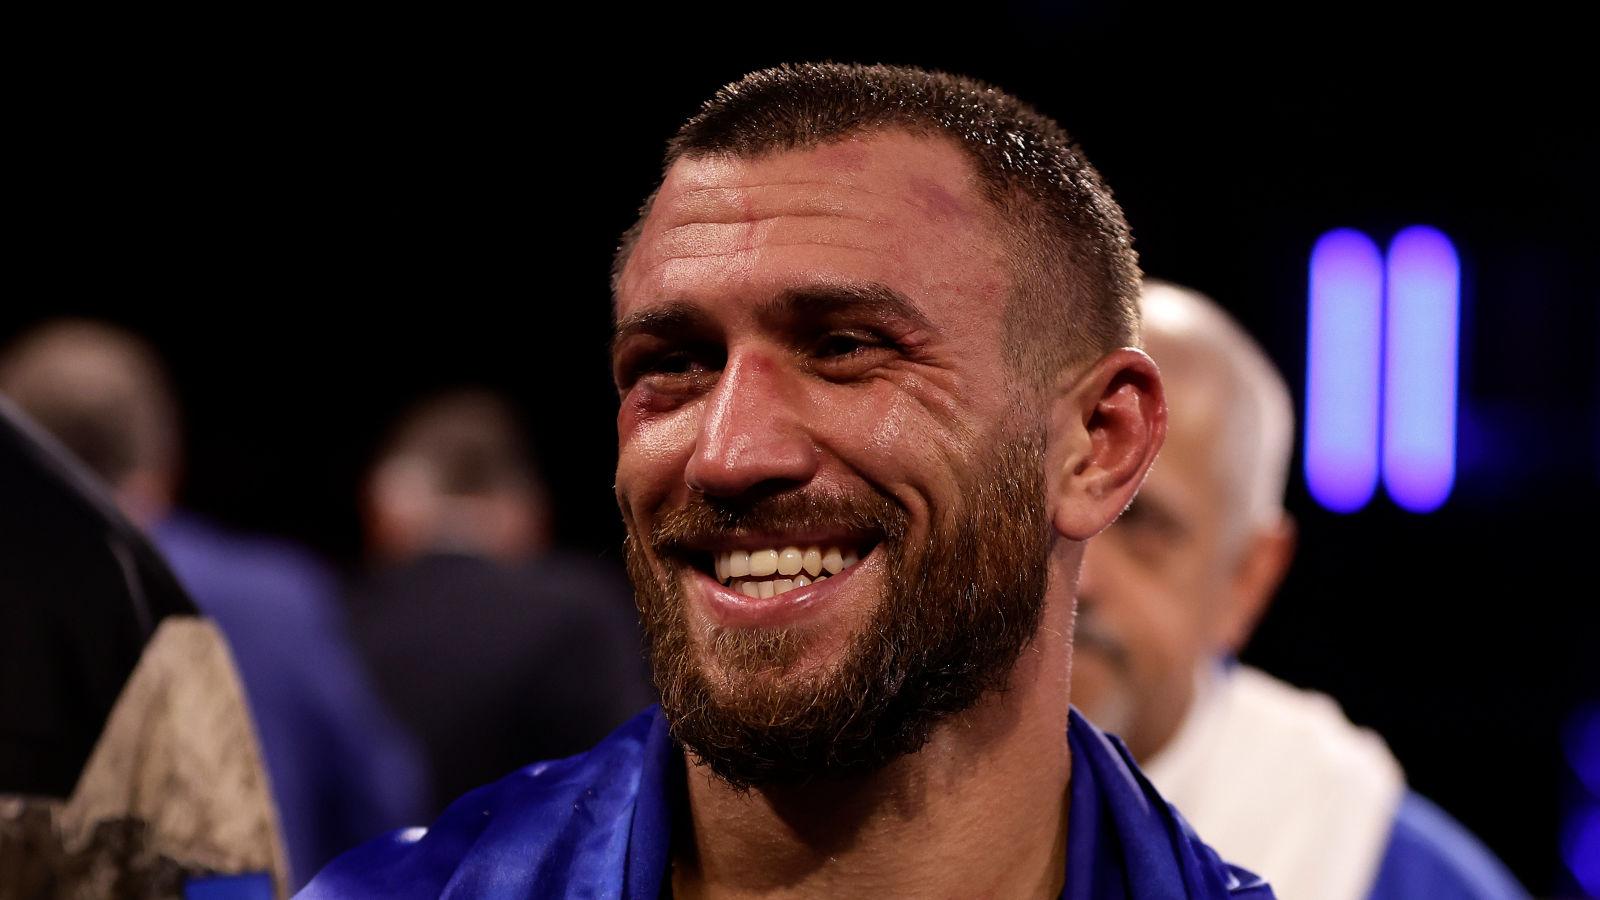 Vasiliy Lomachenko takes on George Kambosos Jr for the IBF lightweight world title this weekend